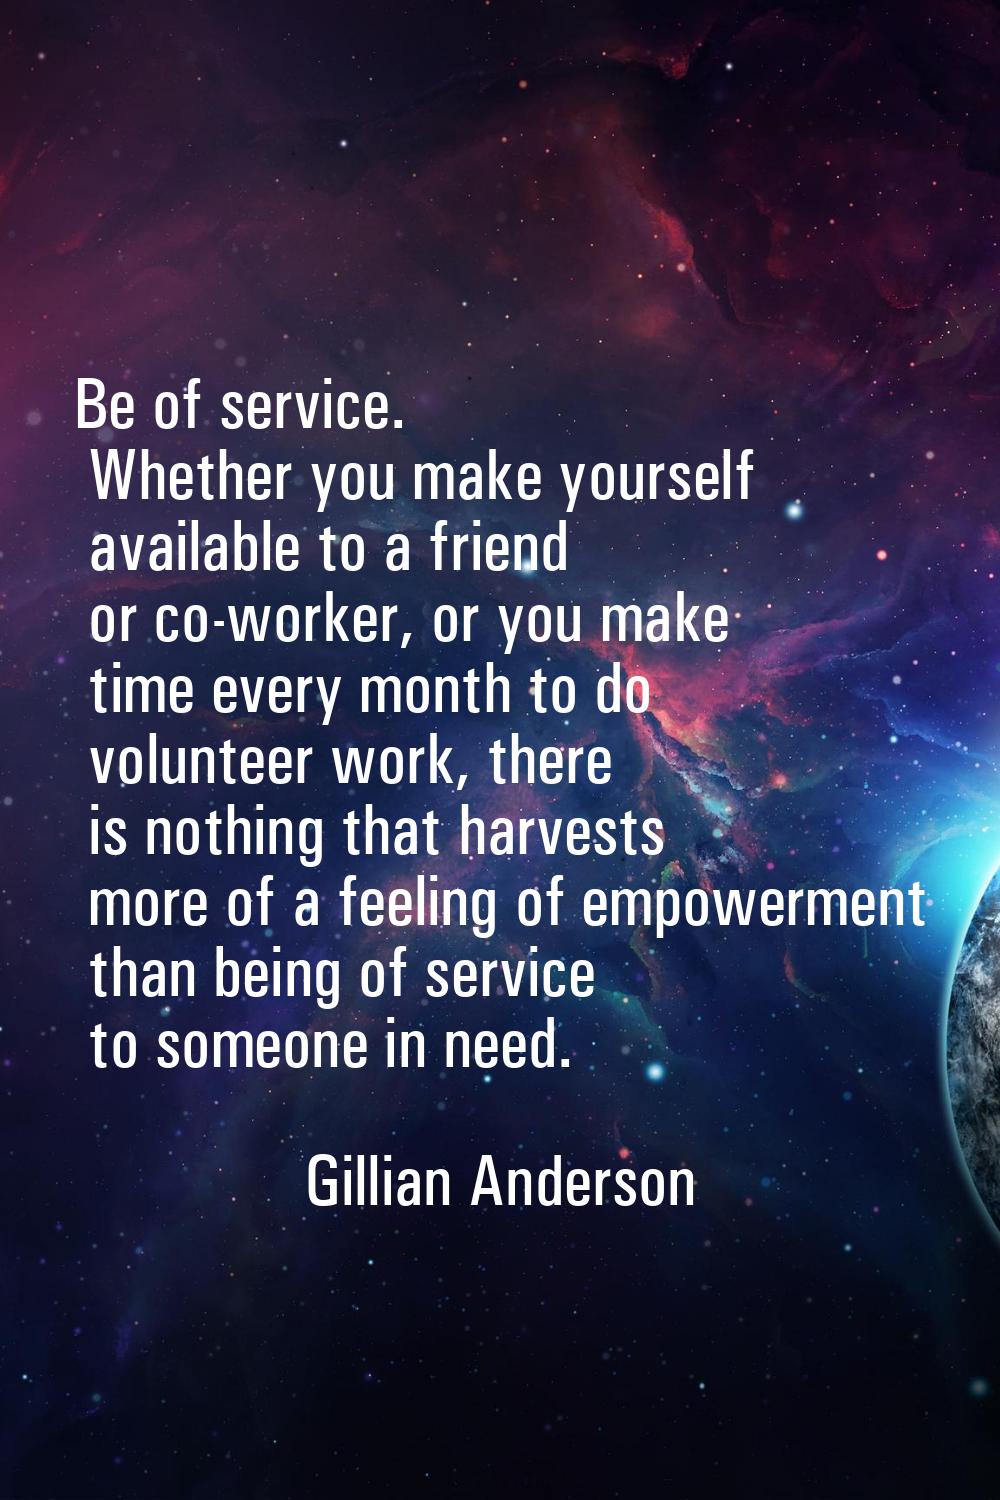 Be of service. Whether you make yourself available to a friend or co-worker, or you make time every